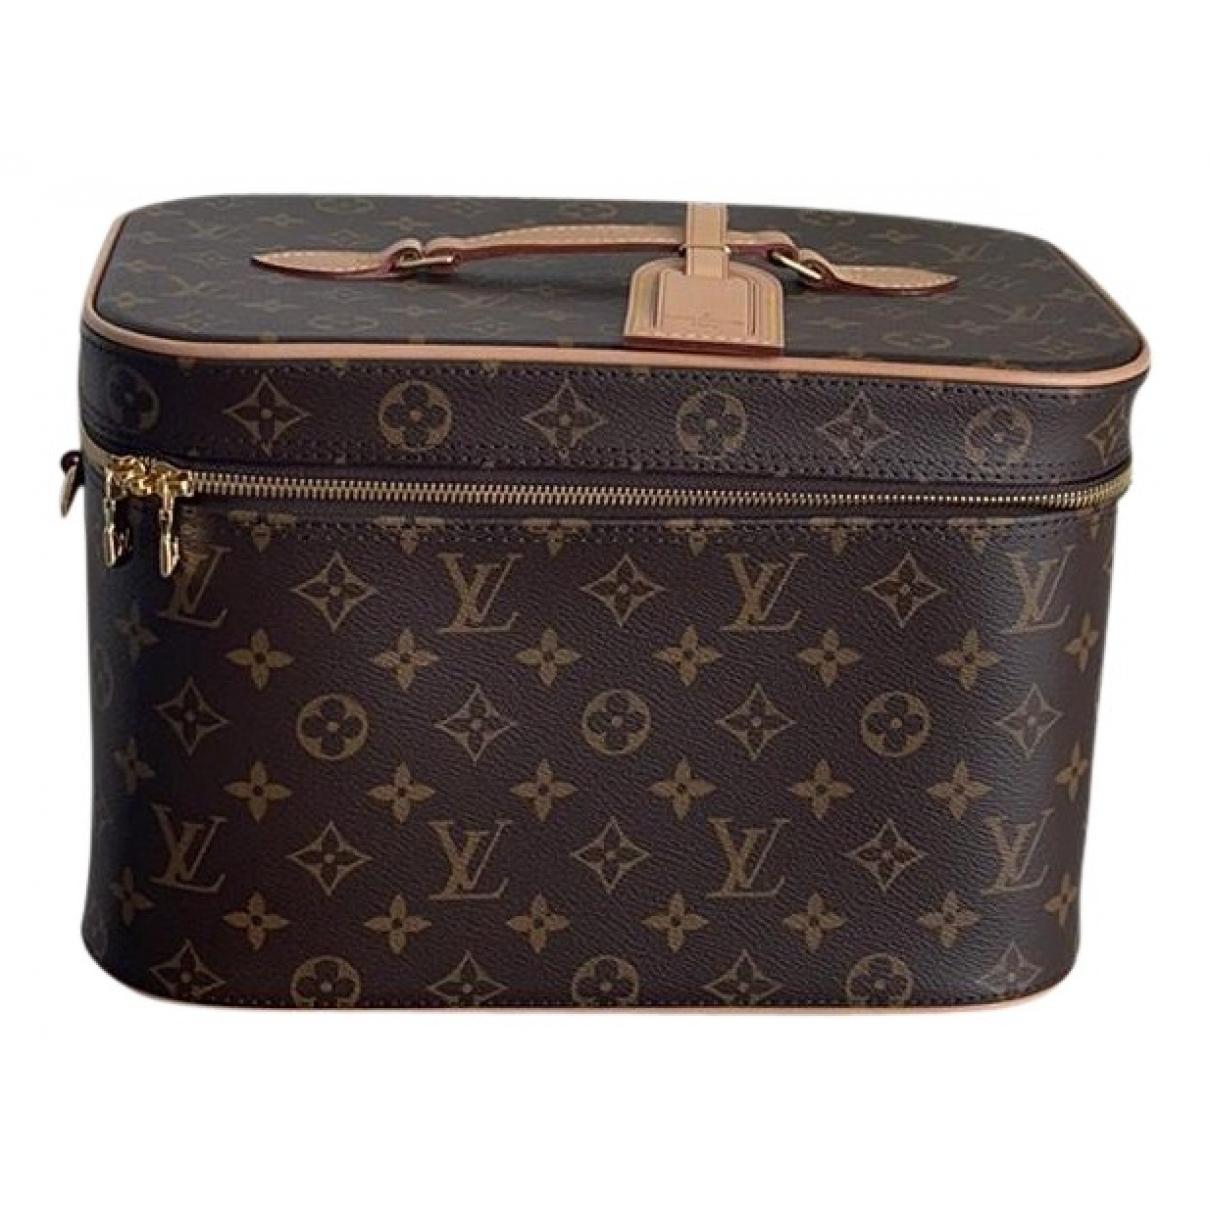 cosmetic case louis vuittons